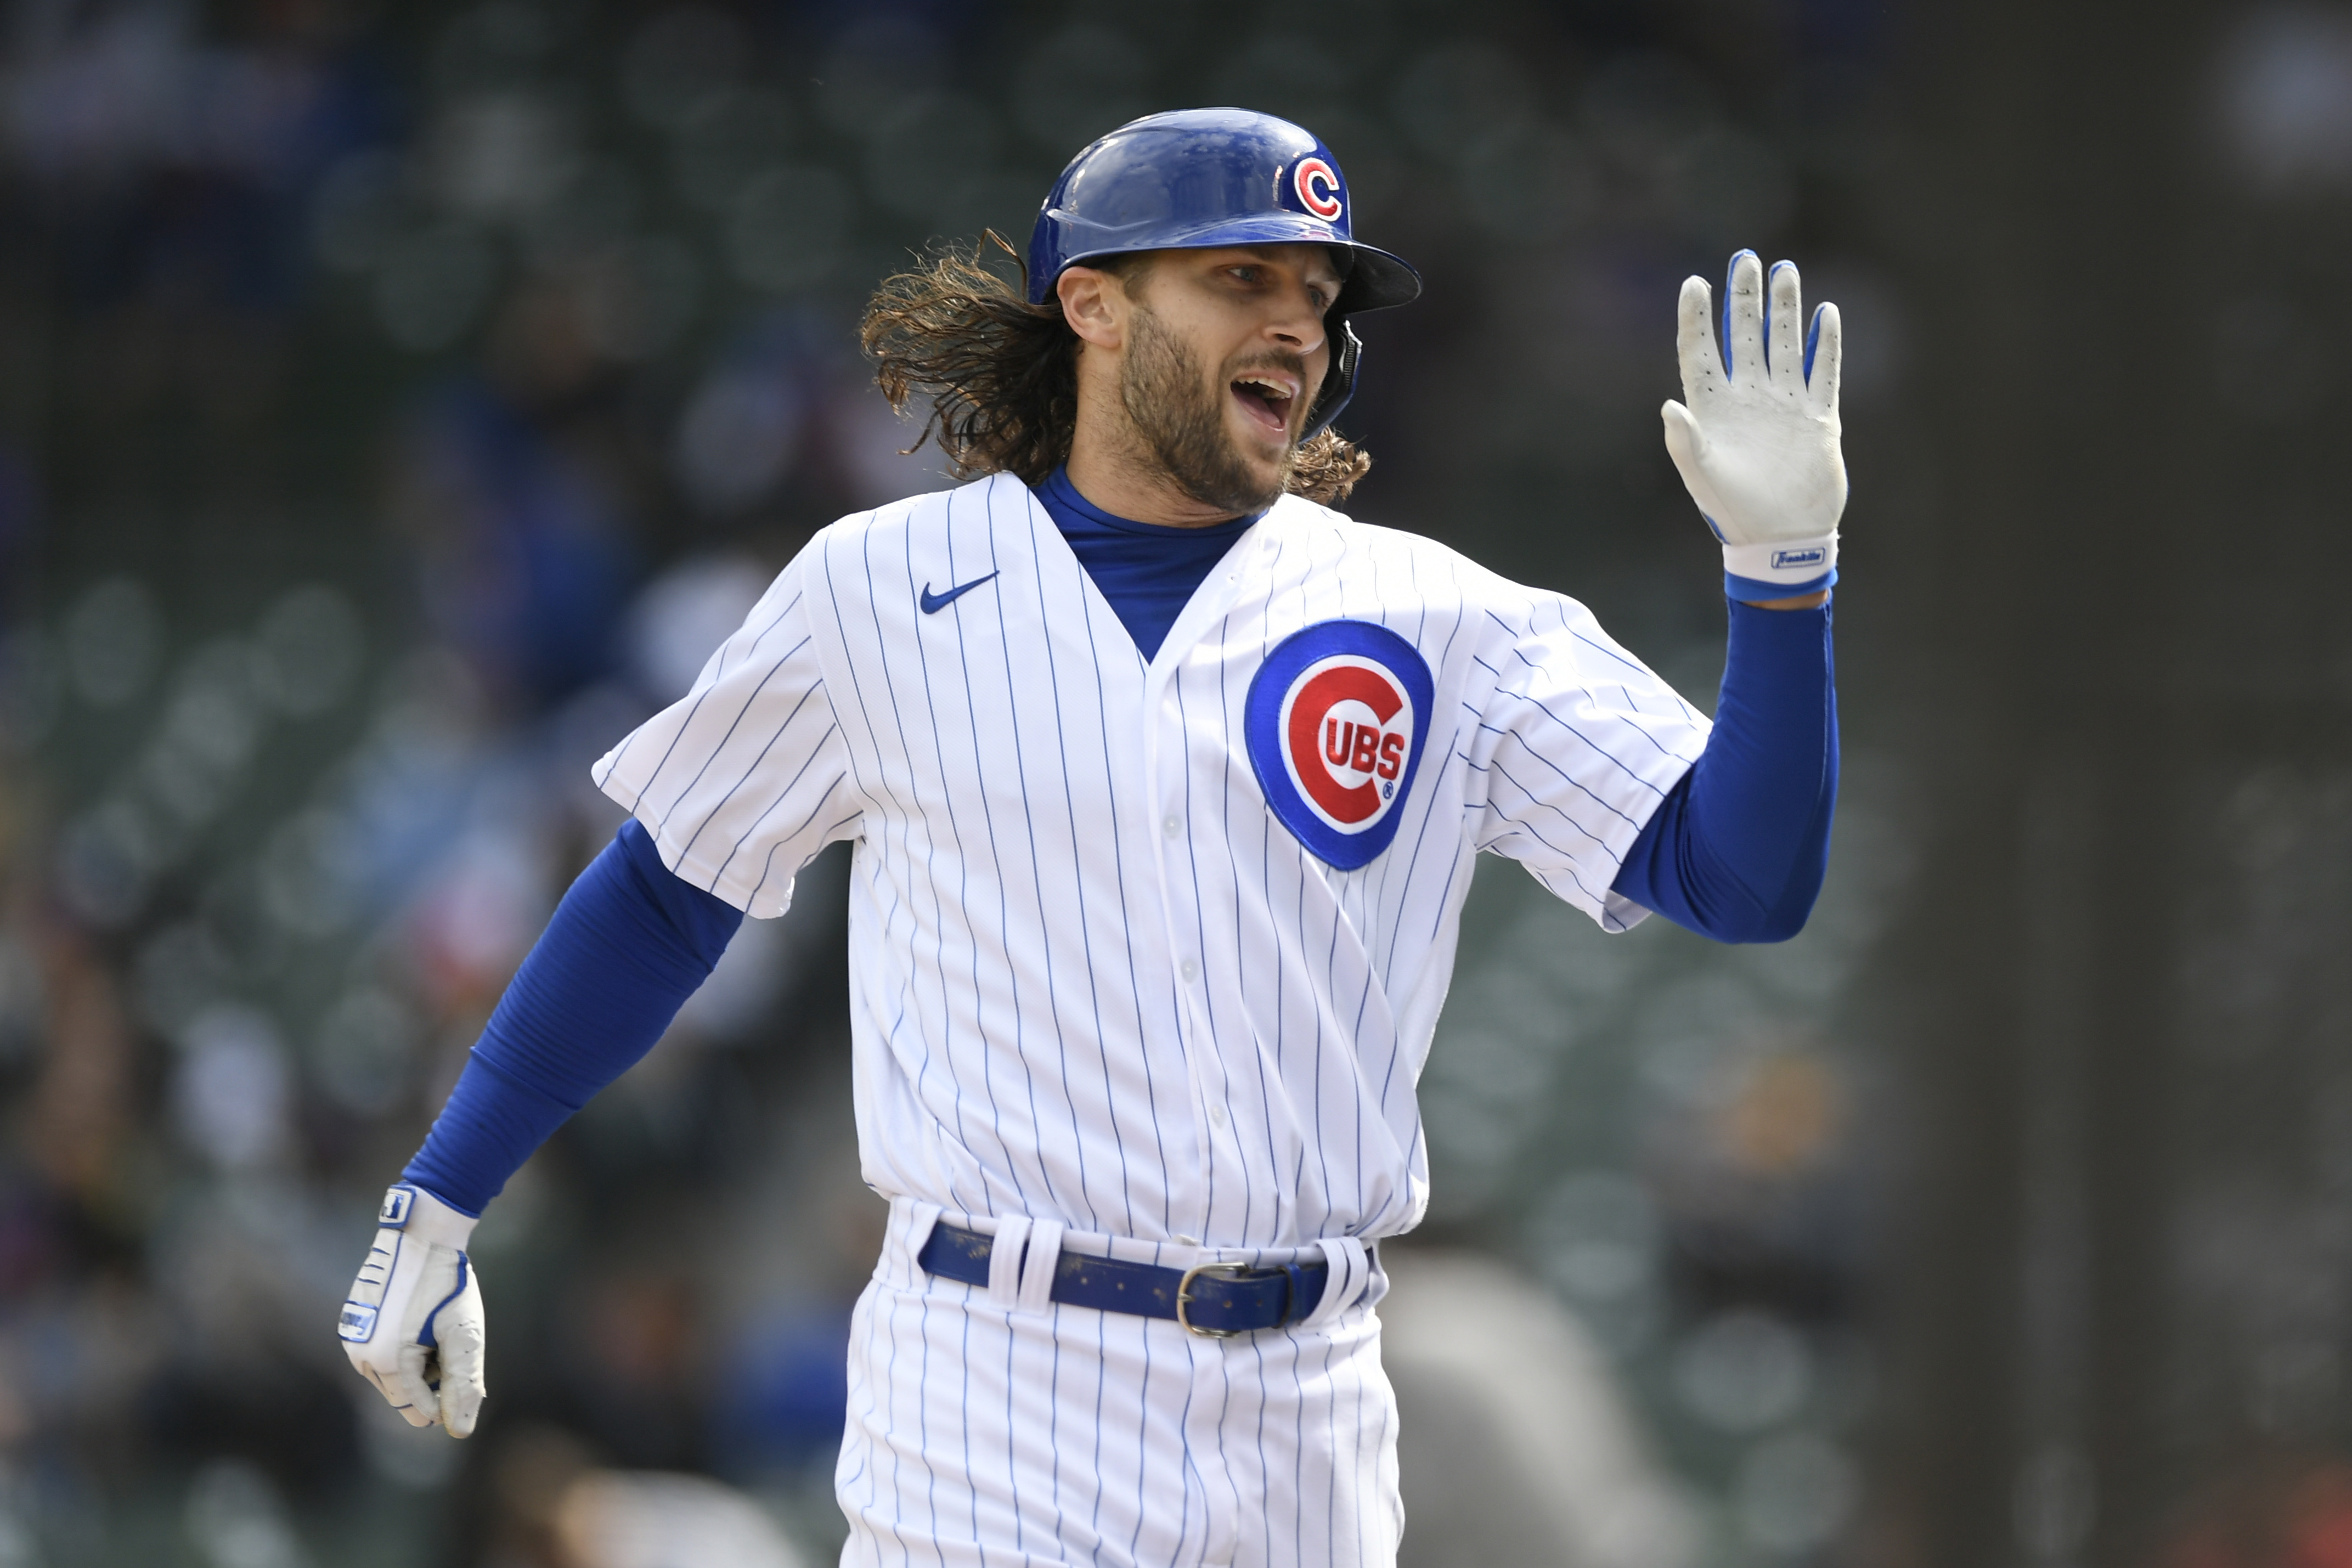 Padres Acquire OF Jake Marisnick From Cubs, by FriarWire